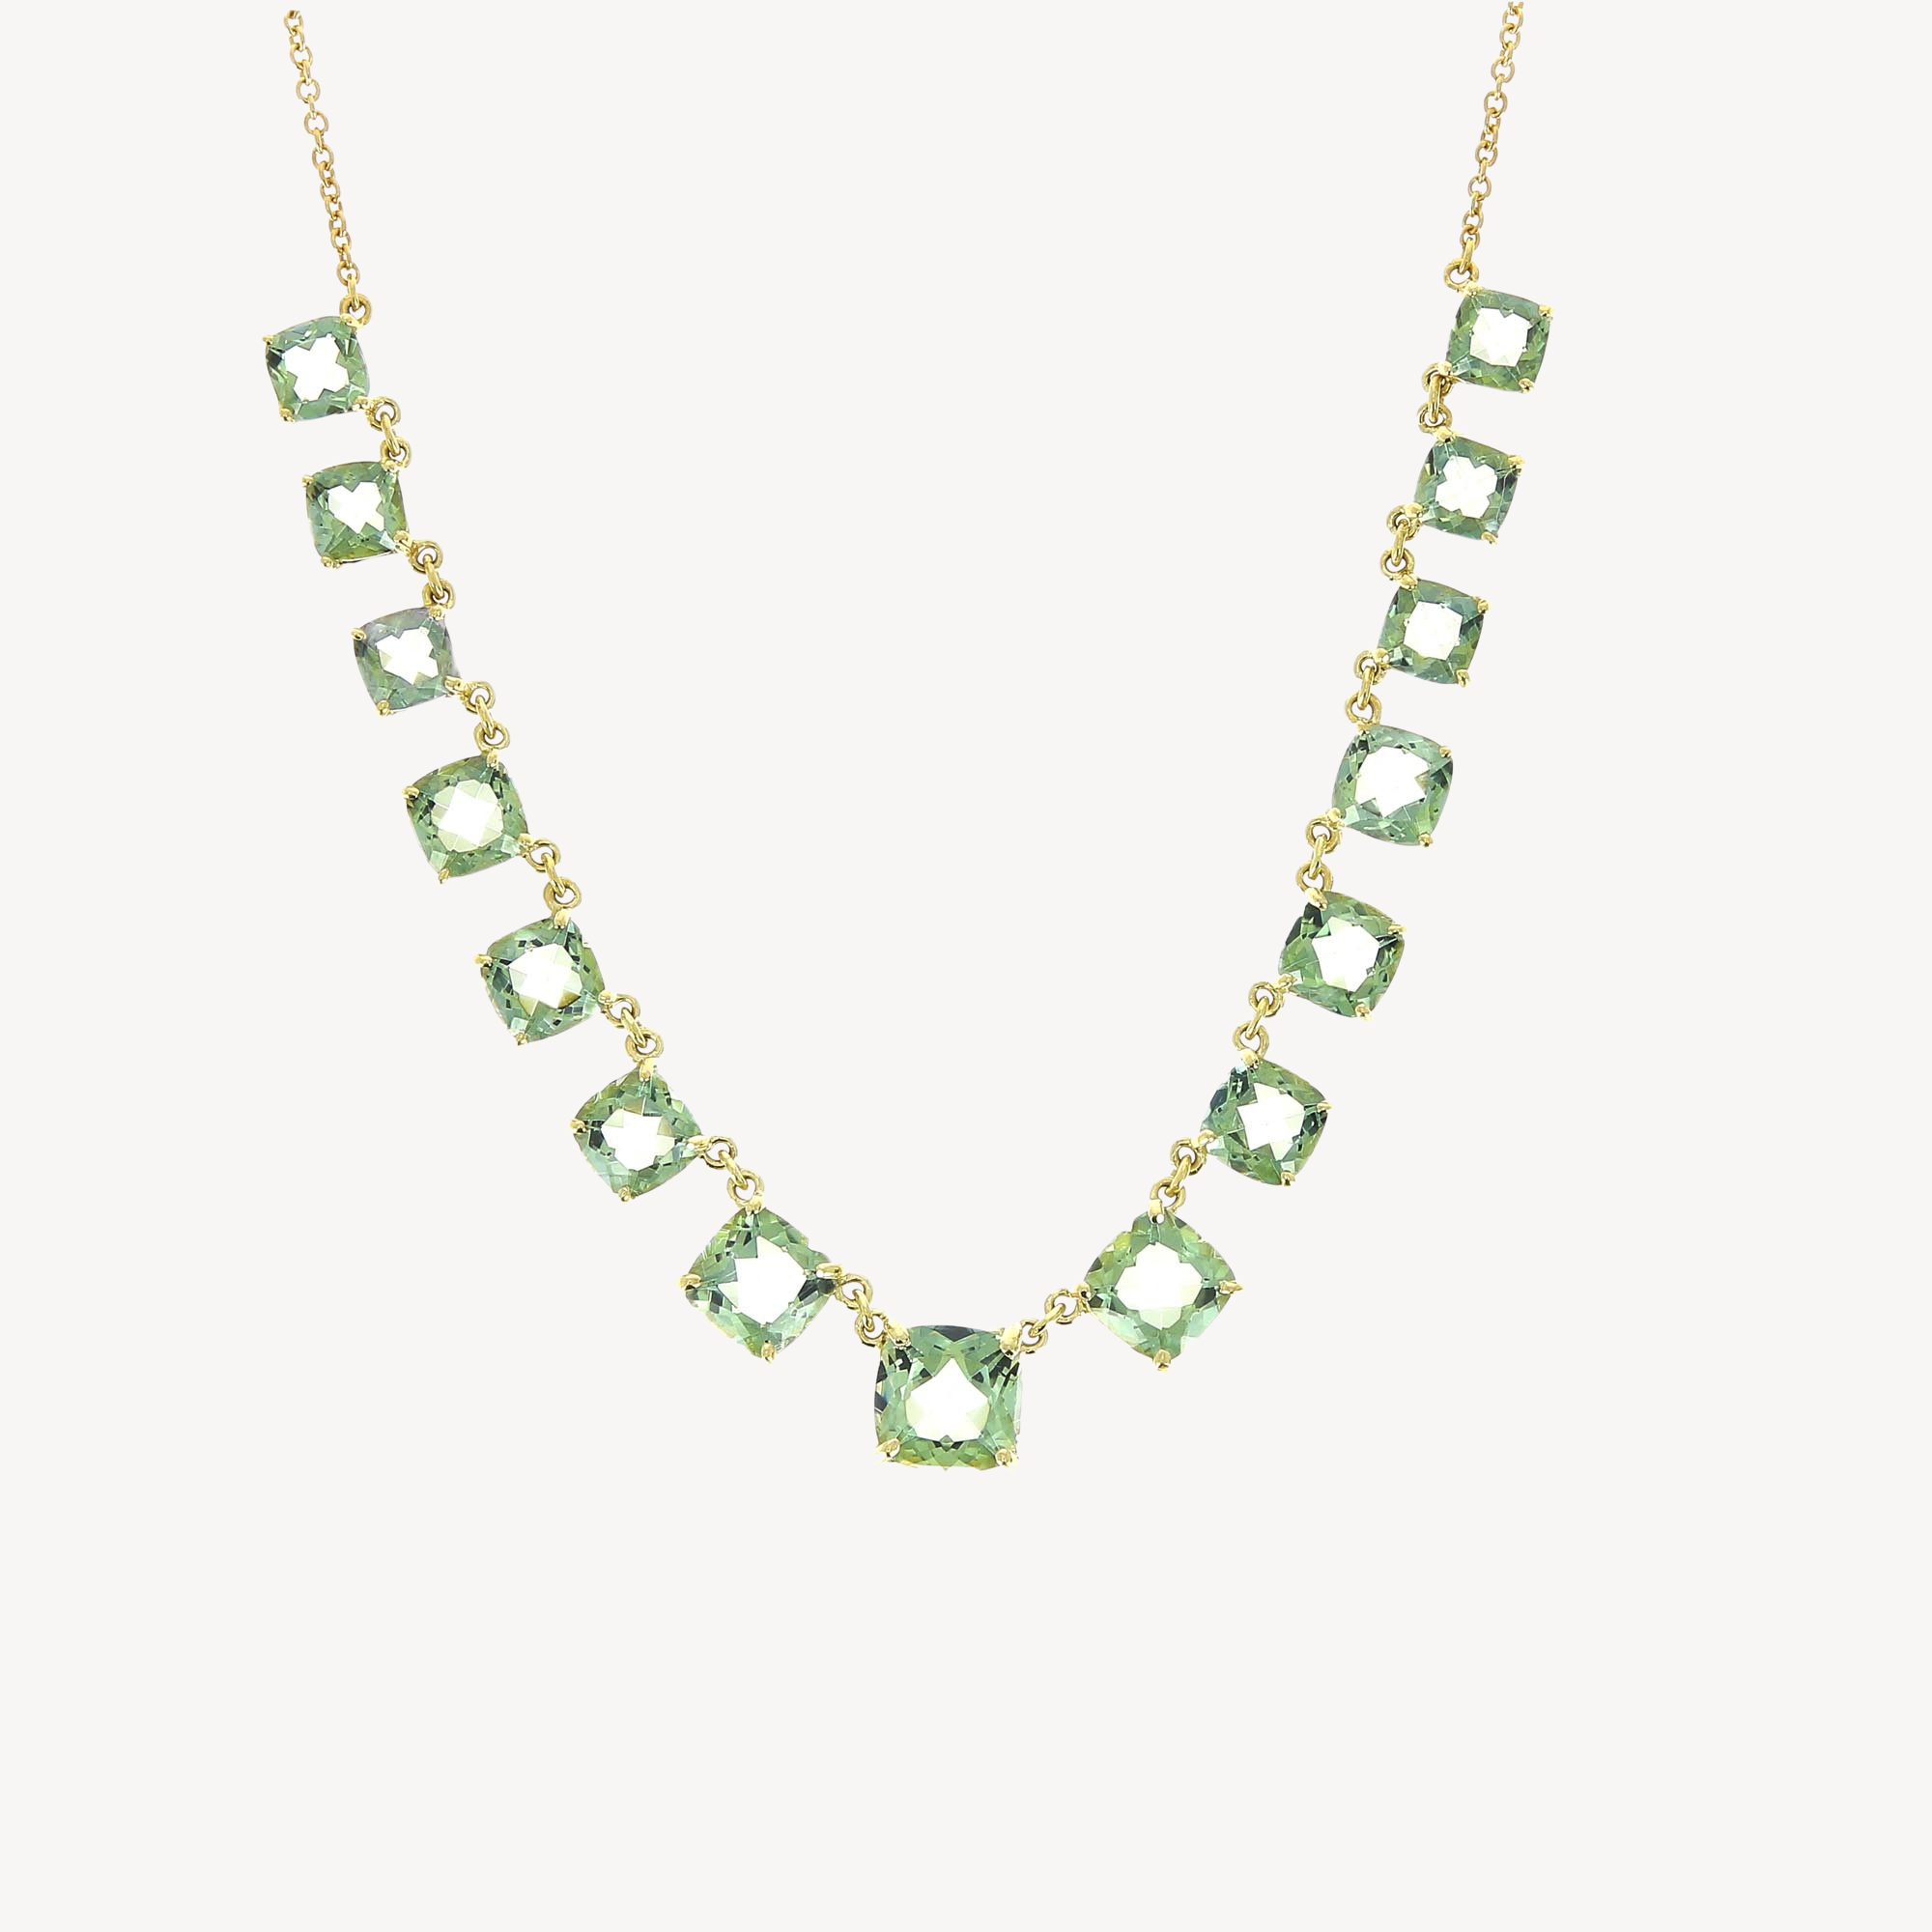 Graduated Green Topaz Necklace